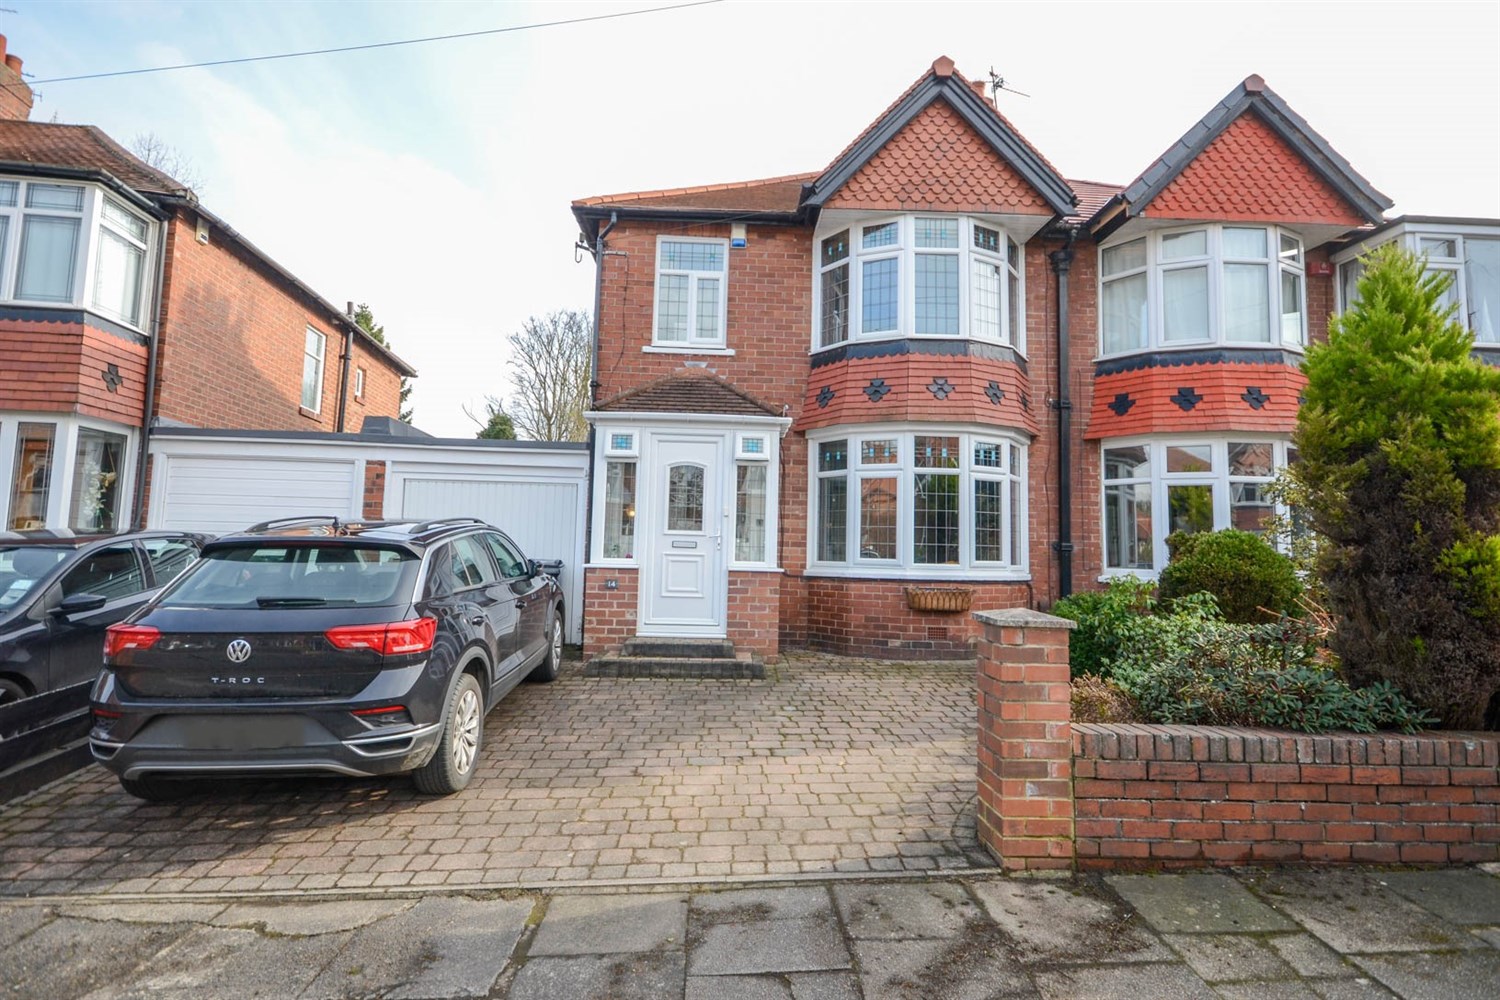 3 bed semi-detached house for sale in Midhurst Road, Benton  - Property Image 1